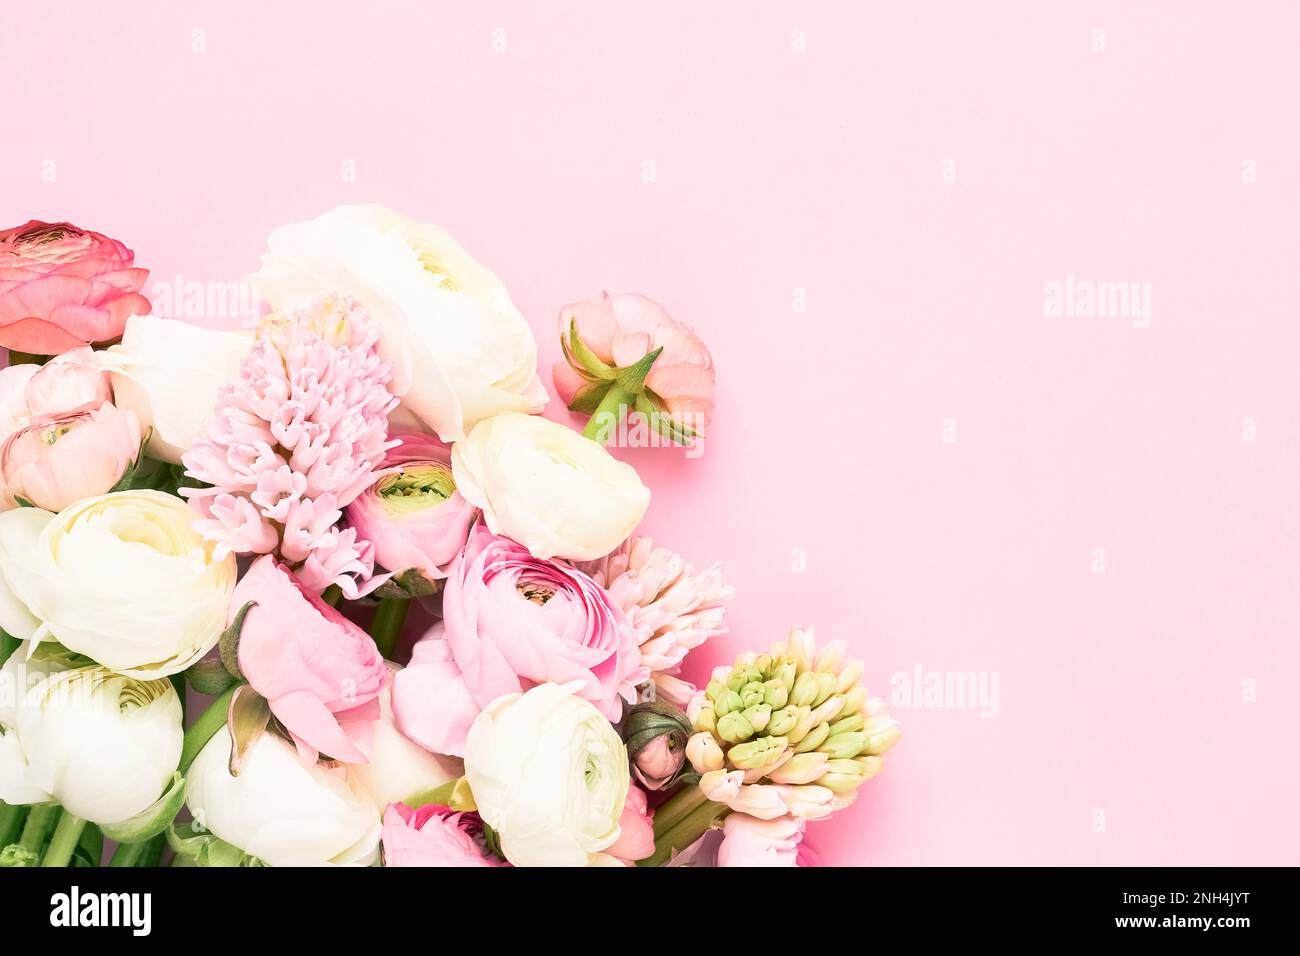 Ranunculus and hyacinths flowers bouquet on a light pink background. Mothers Day, Valentines Day, birthday concept. Copy space for text Stock Photo